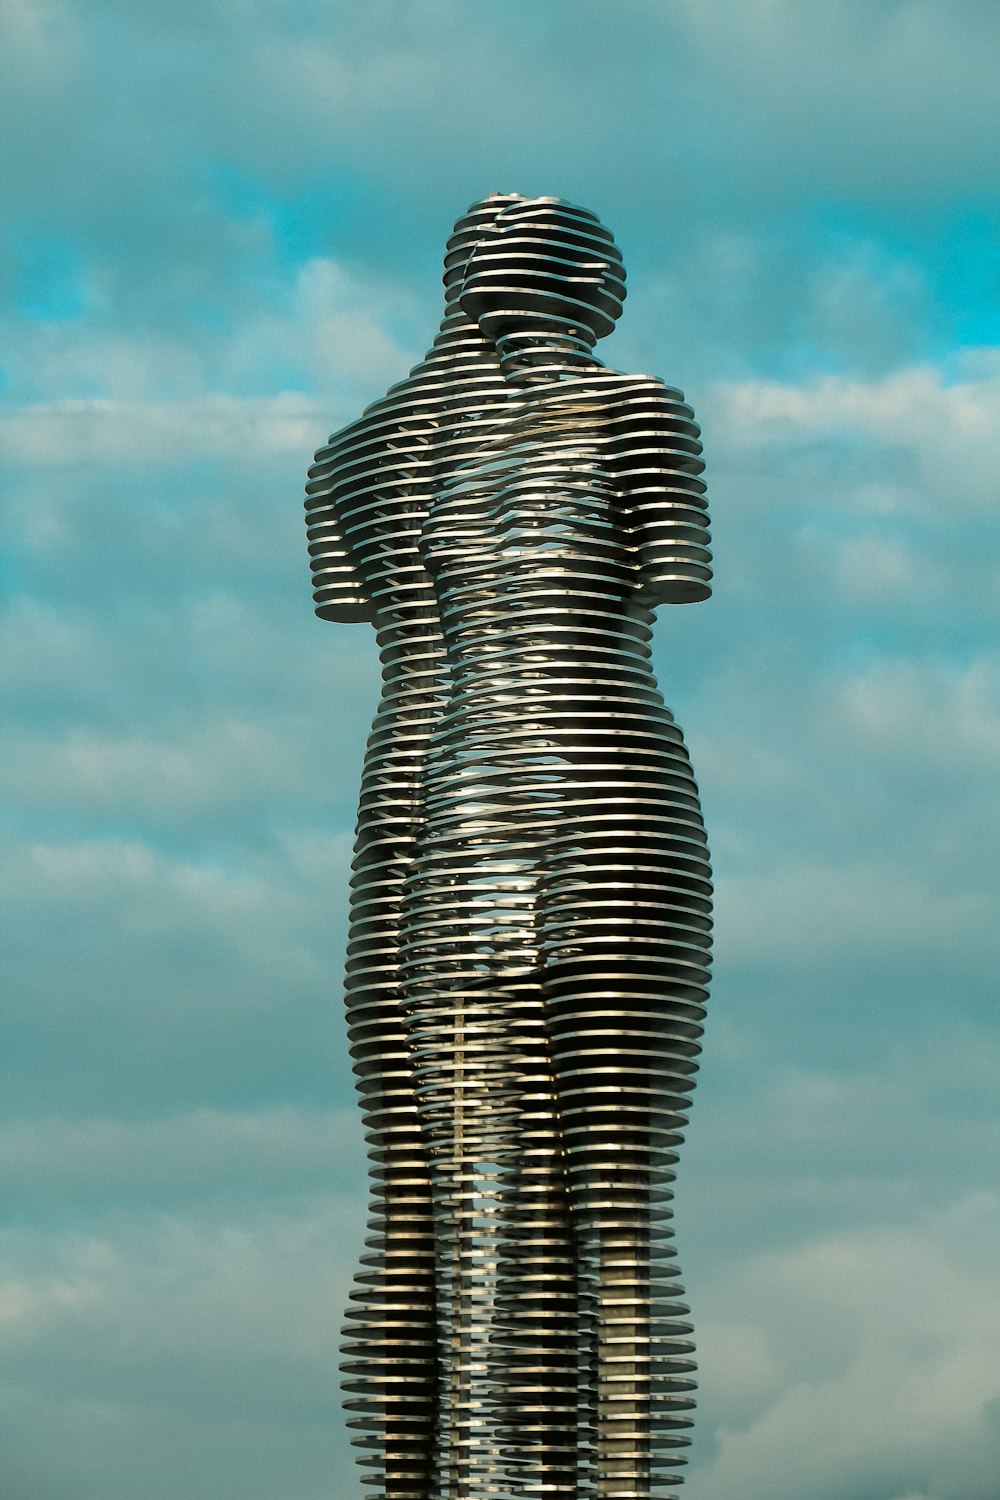 a statue of a woman standing in front of a cloudy sky